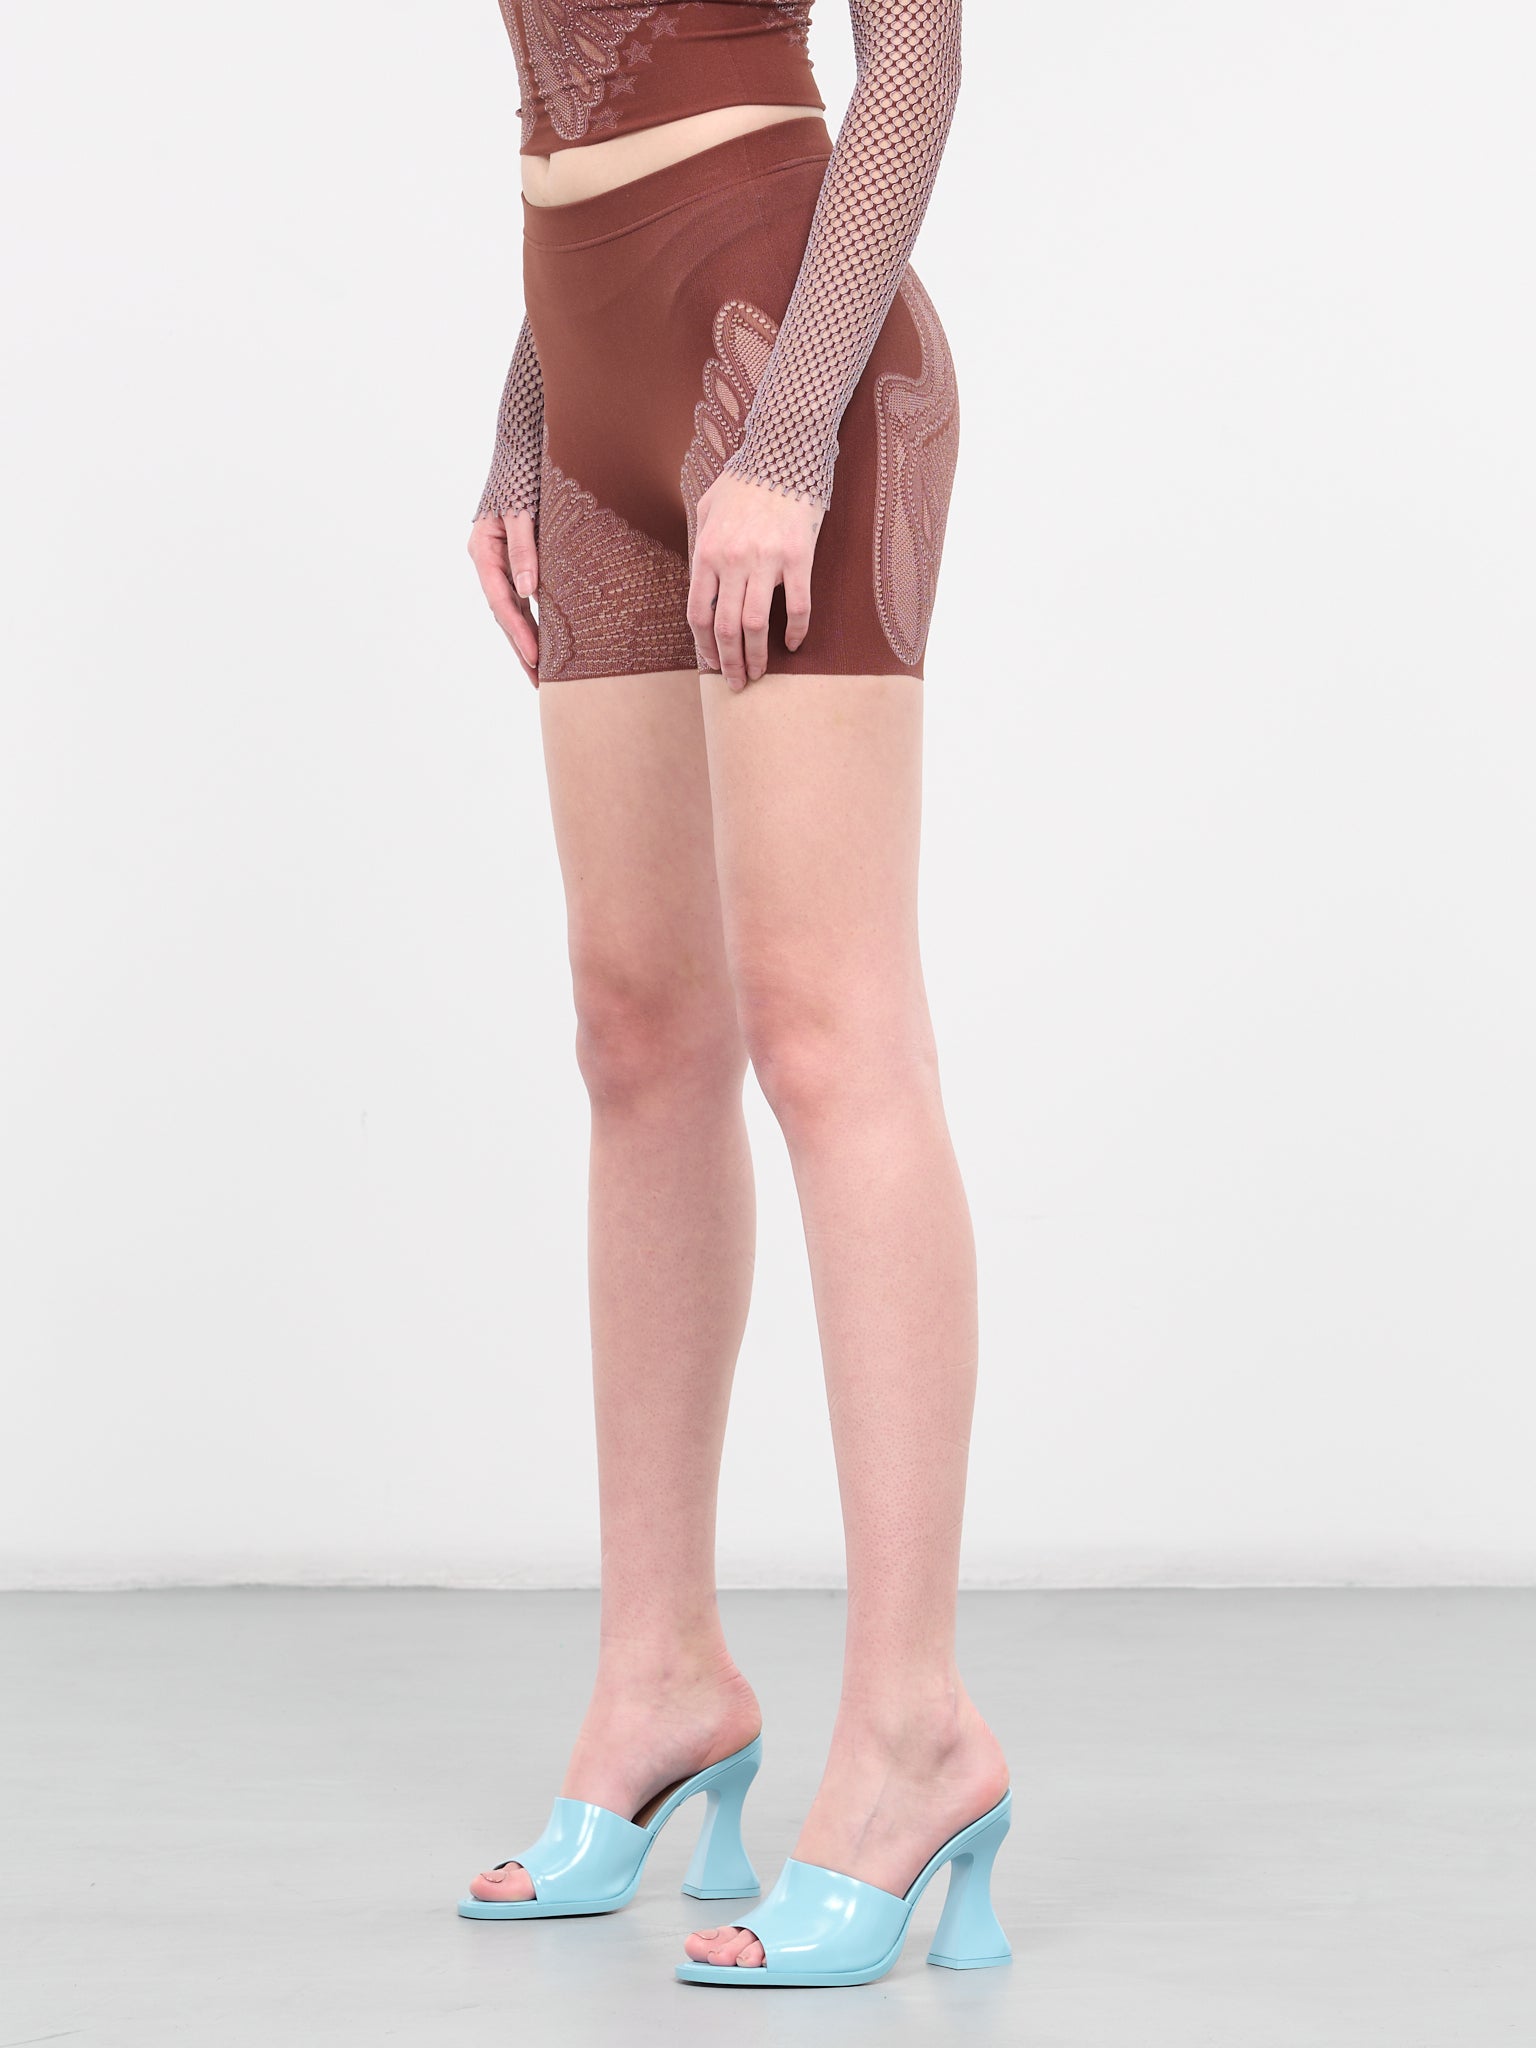 Raven Shorts (CSW145-RAVEN-OLD-MONEY-BROWN)